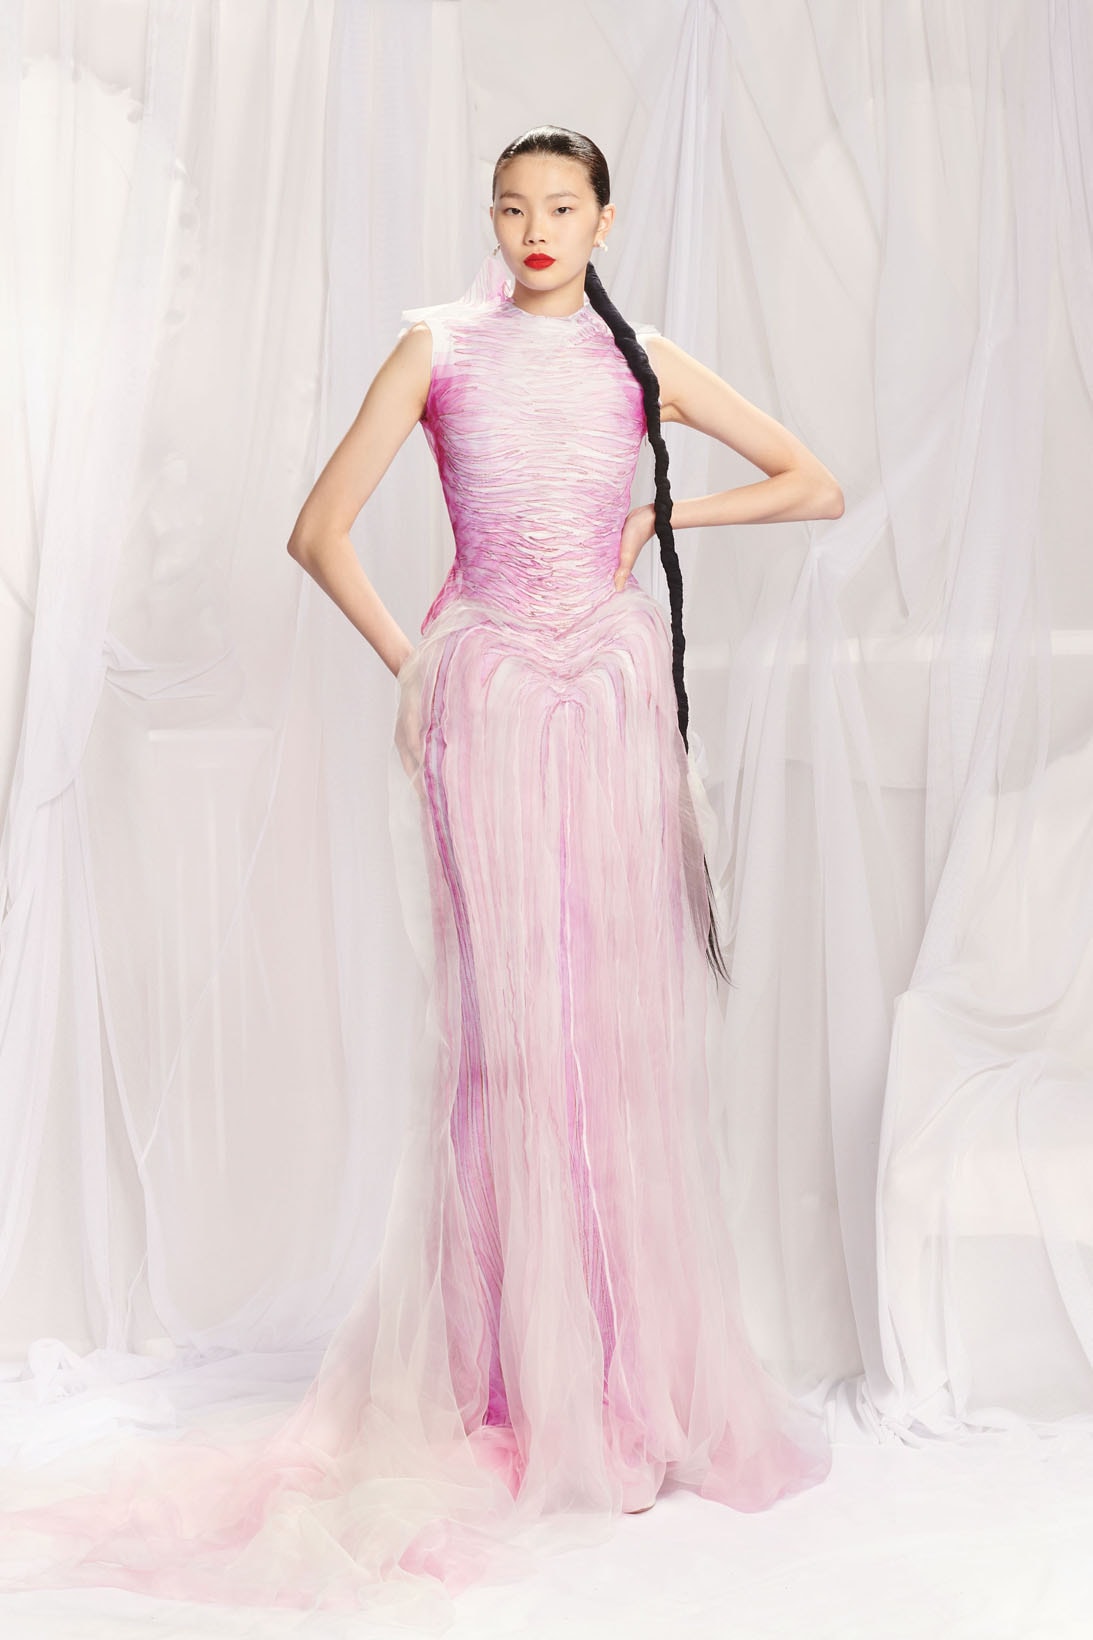 Jean Paul Gaultier Haute Couture Spring Glenn Martens Takeover Collection Images